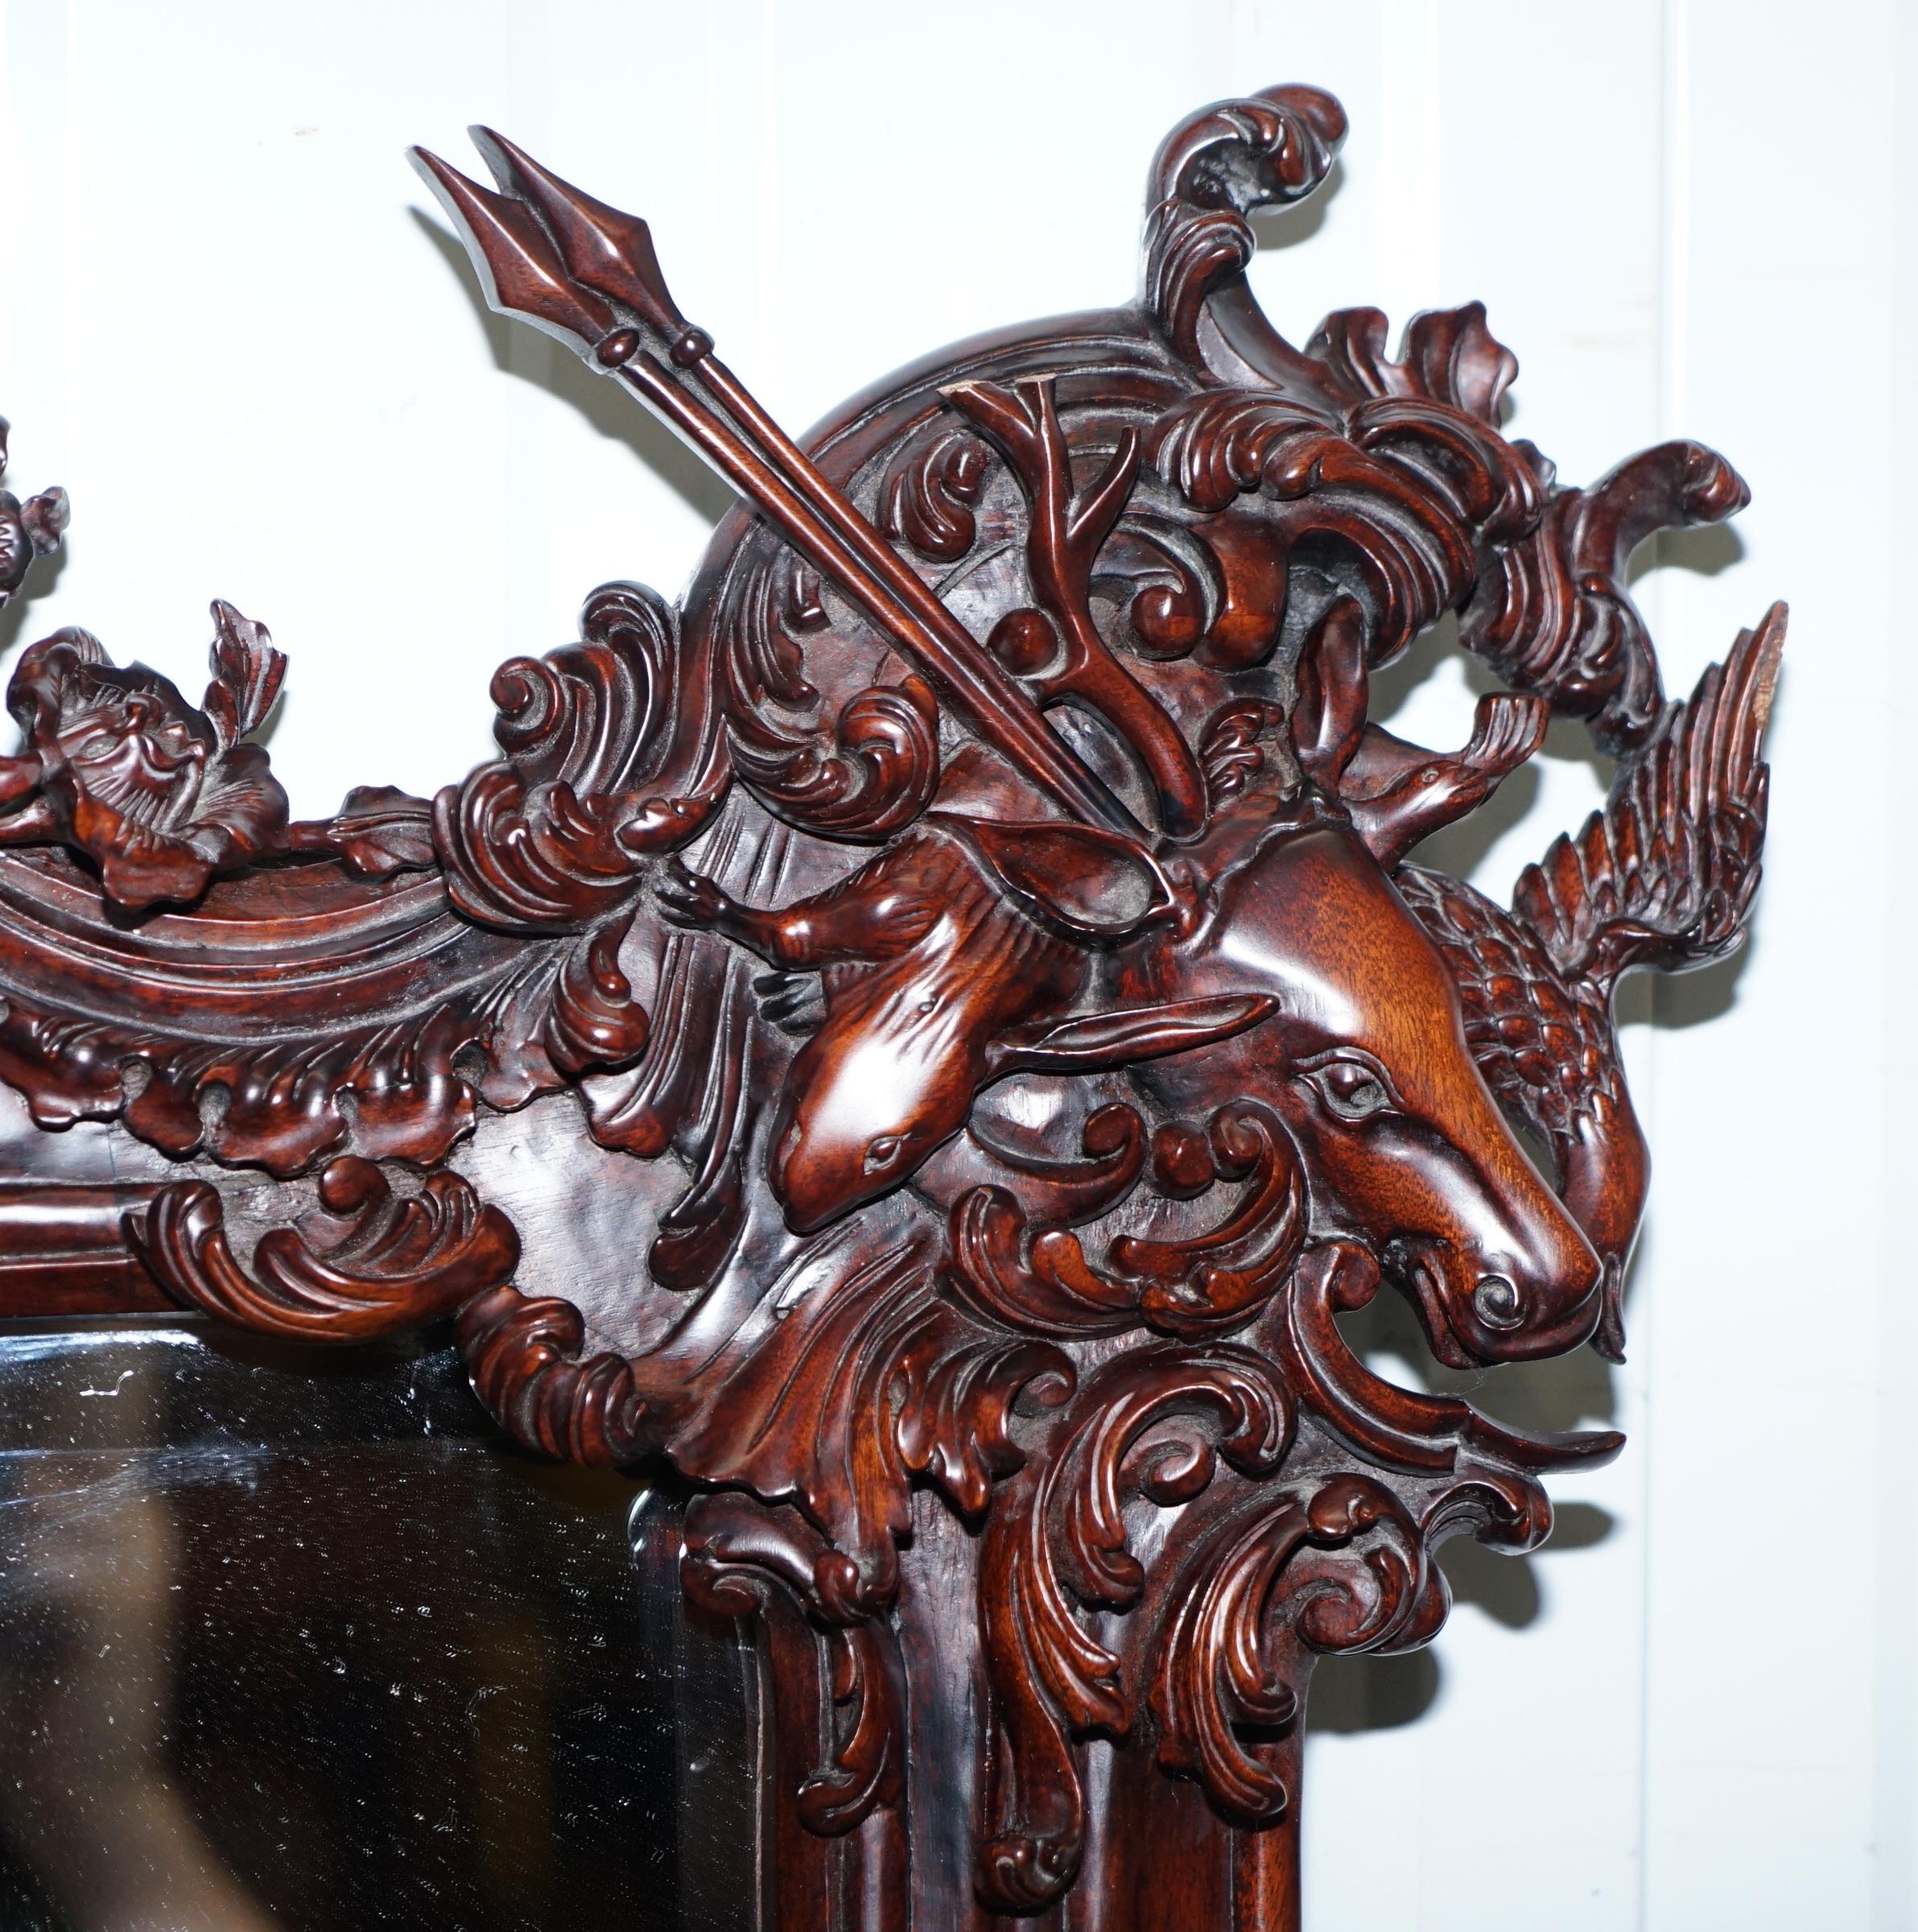 Hand-Crafted Hand Carved Ornate Mahogany Mirror with Armorial Crest Horns Animals Flowers Cow